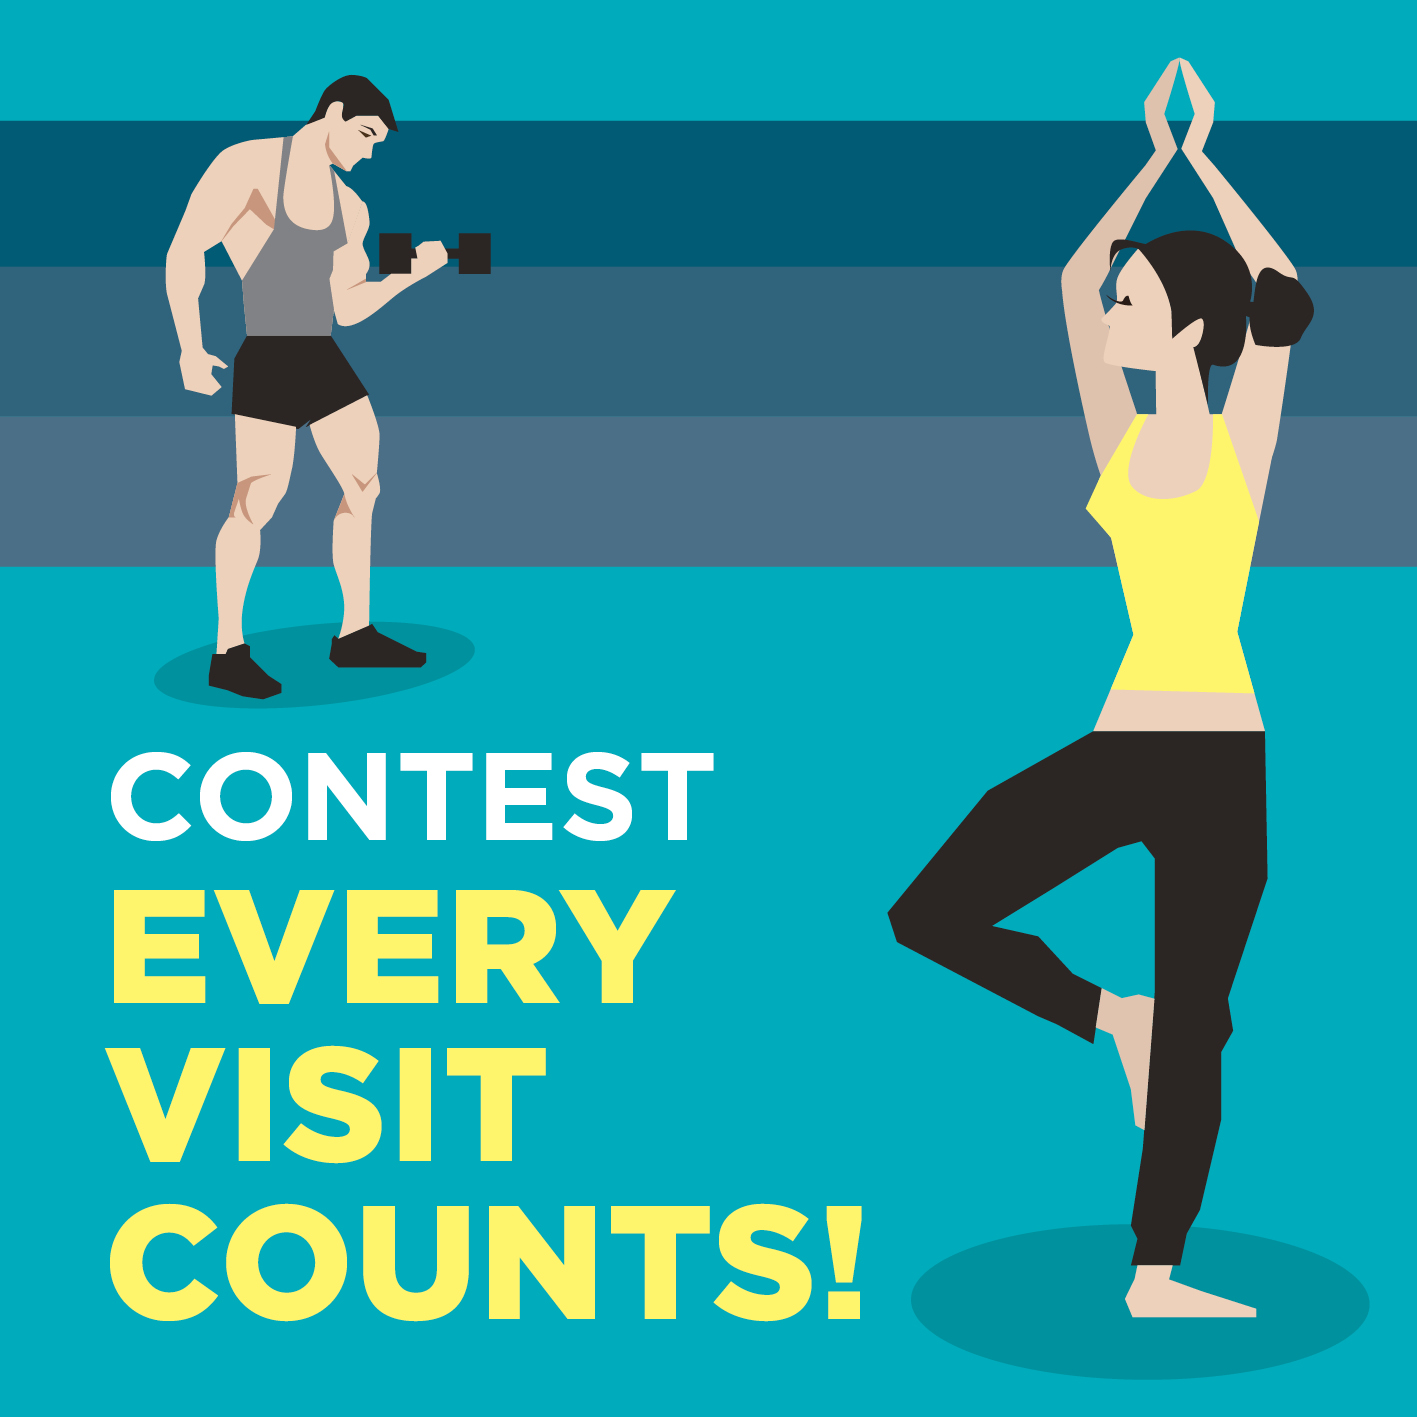 Contest Every visit counts!